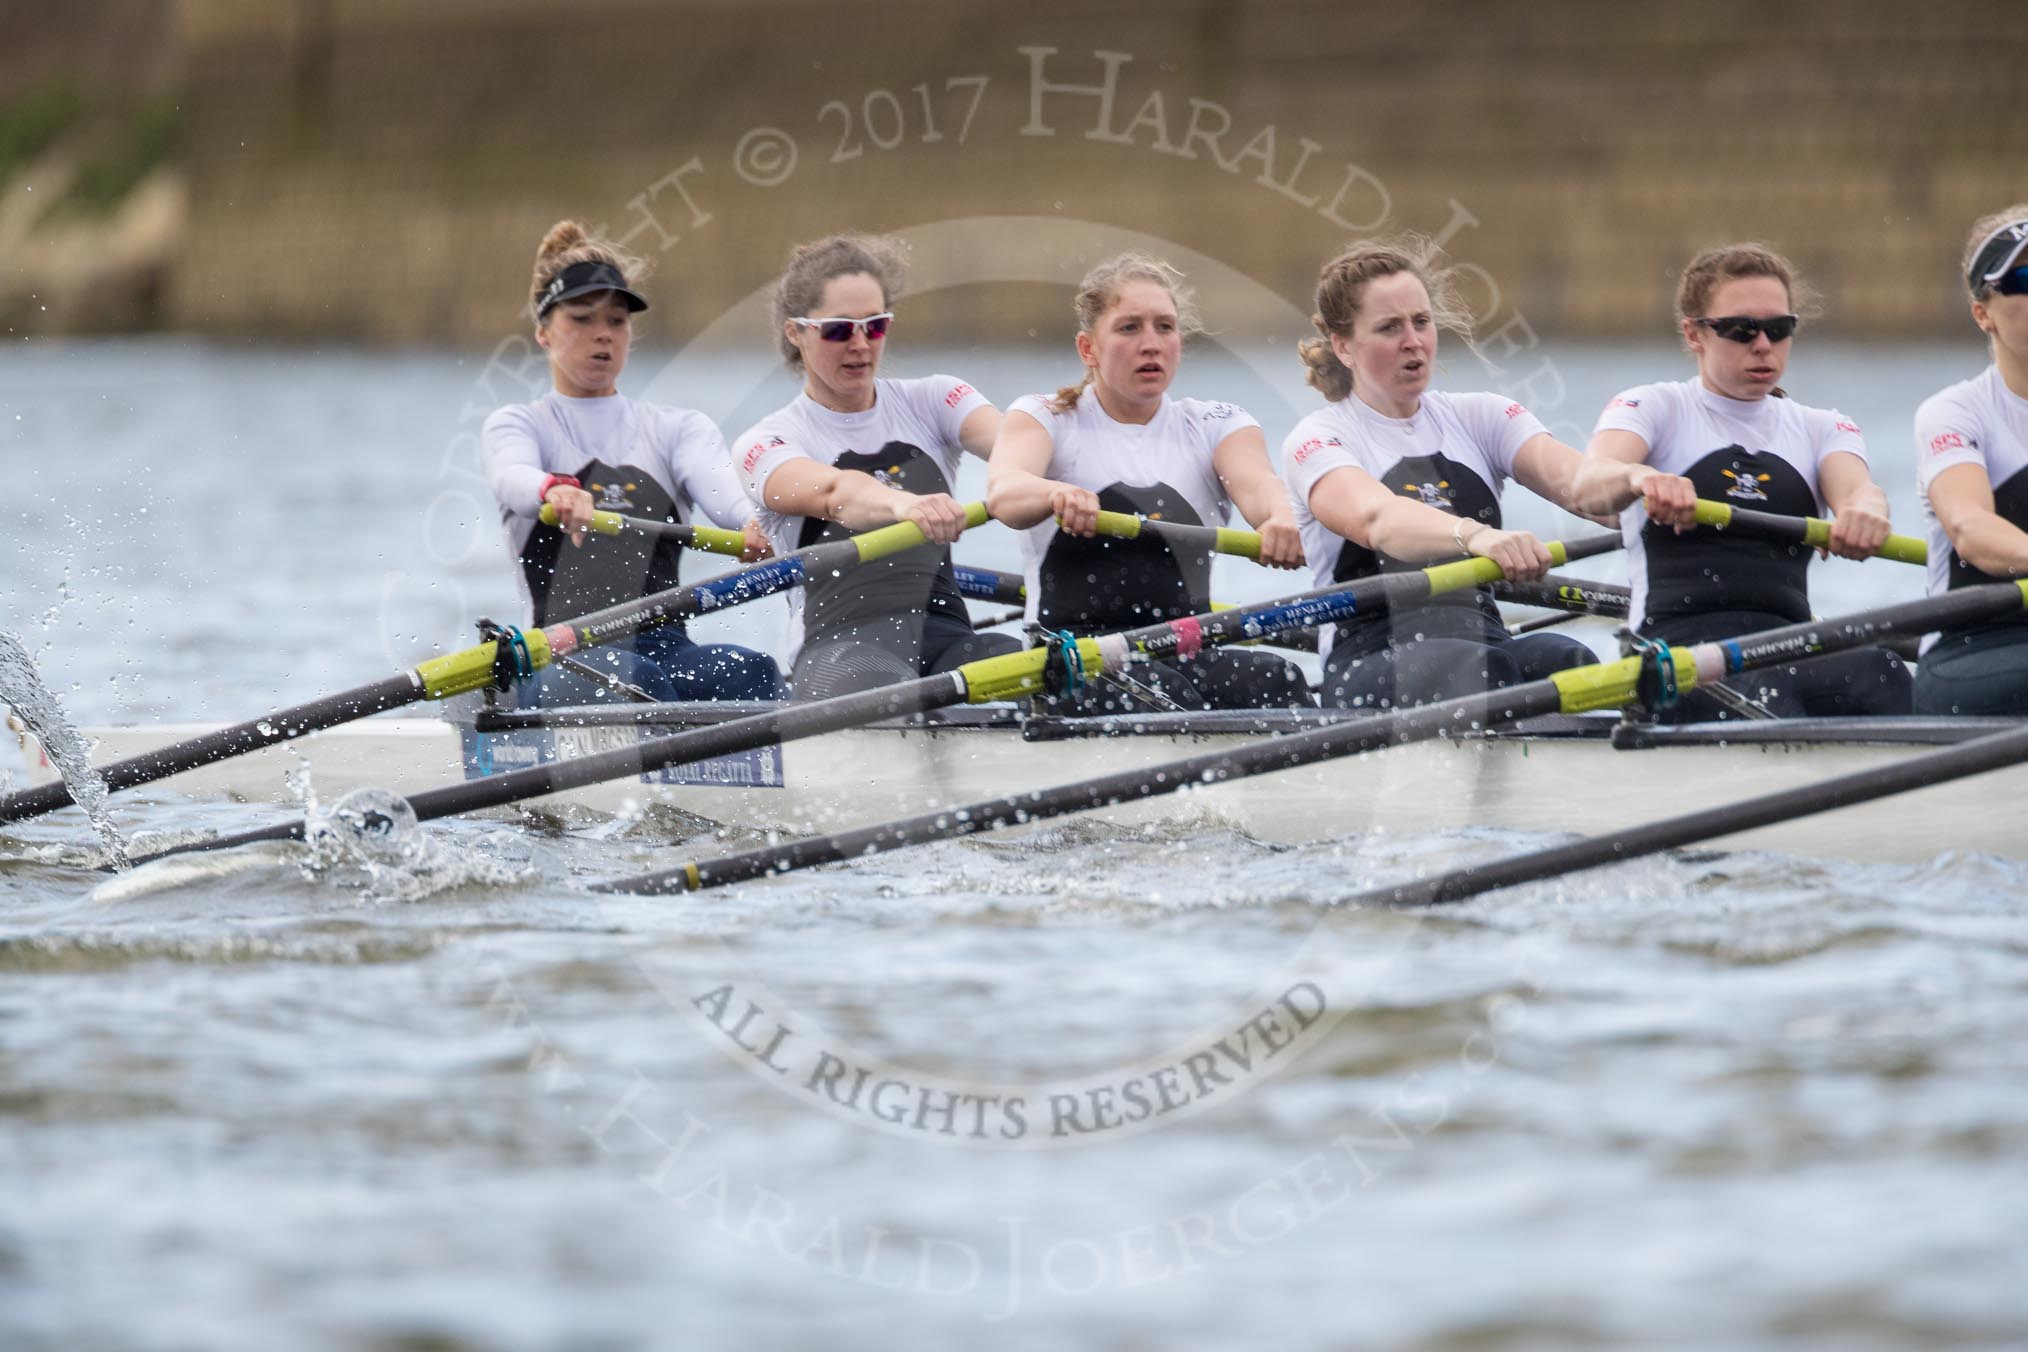 The Cancer Research UK Boat Race season 2017 - Women's Boat Race Fixture OUWBC vs Molesey BC: Molesey in the early phase of the race - bow Emma McDonald, 2 Caitlin Boyland, 3 Lucy Primmer, 4 Claire McKeown, 5 Katie Bartlett, 6 Elo Luik, 7 Gabriella Rodriguez, stroke Ruth Whyman, cox Anna Corderoy.
River Thames between Putney Bridge and Mortlake,
London SW15,

United Kingdom,
on 19 March 2017 at 16:01, image #55